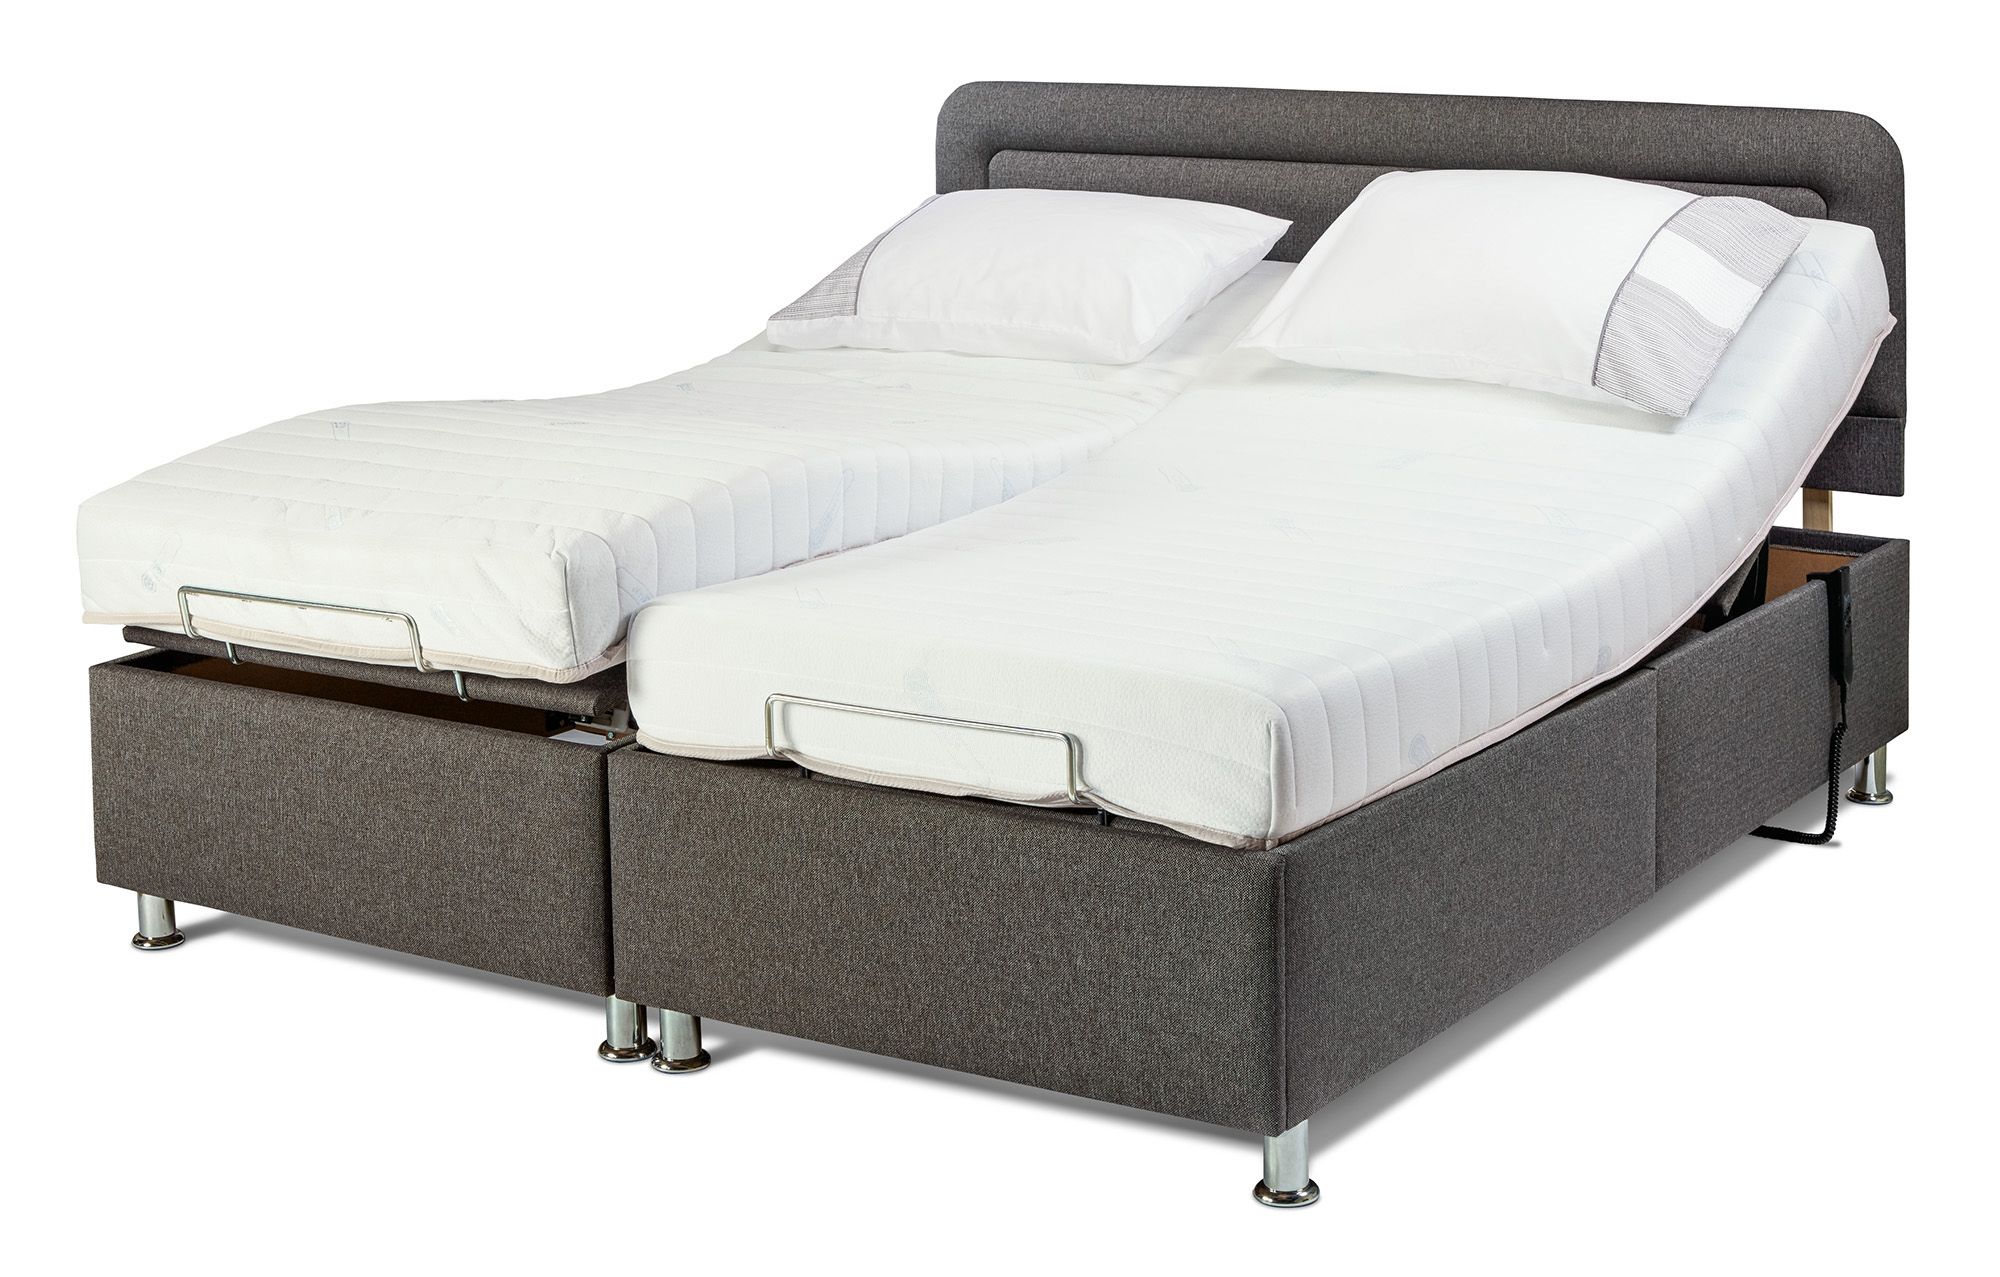 adjustable mattresses small double size